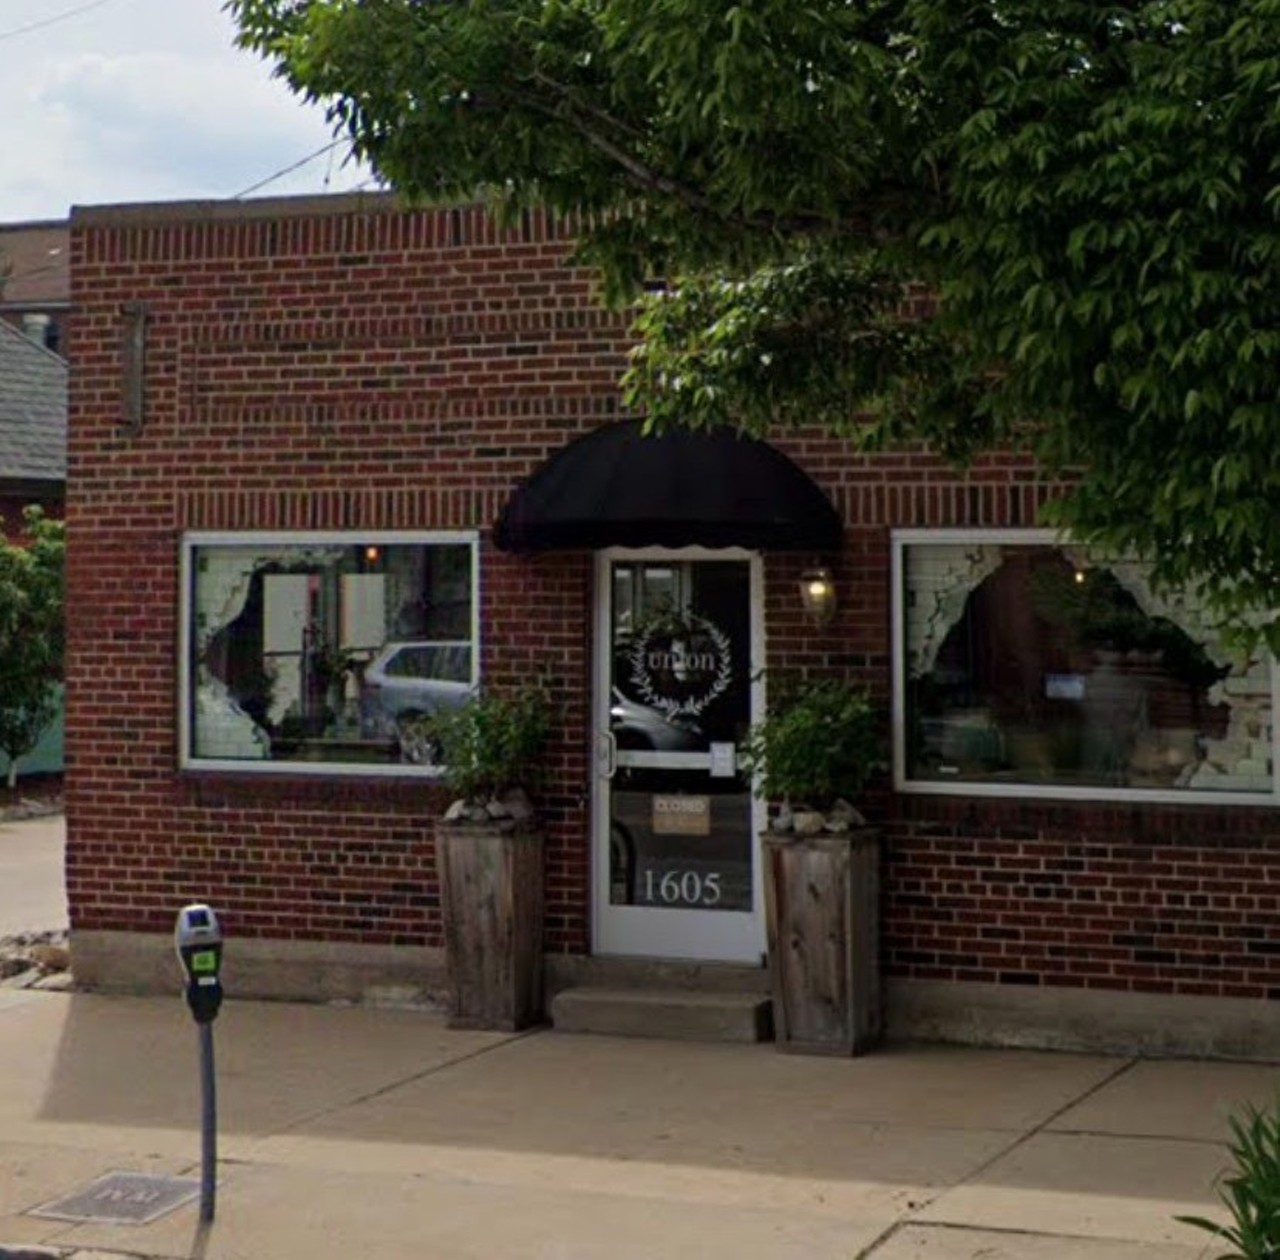 Union Studio
(two locations, including 1605 Tower Grove Avenue, 314-771-5398, stlunionstudio.com)
Recharge with some of the sets at Union Studio.
Find out more here.
Photo credit: Google Maps